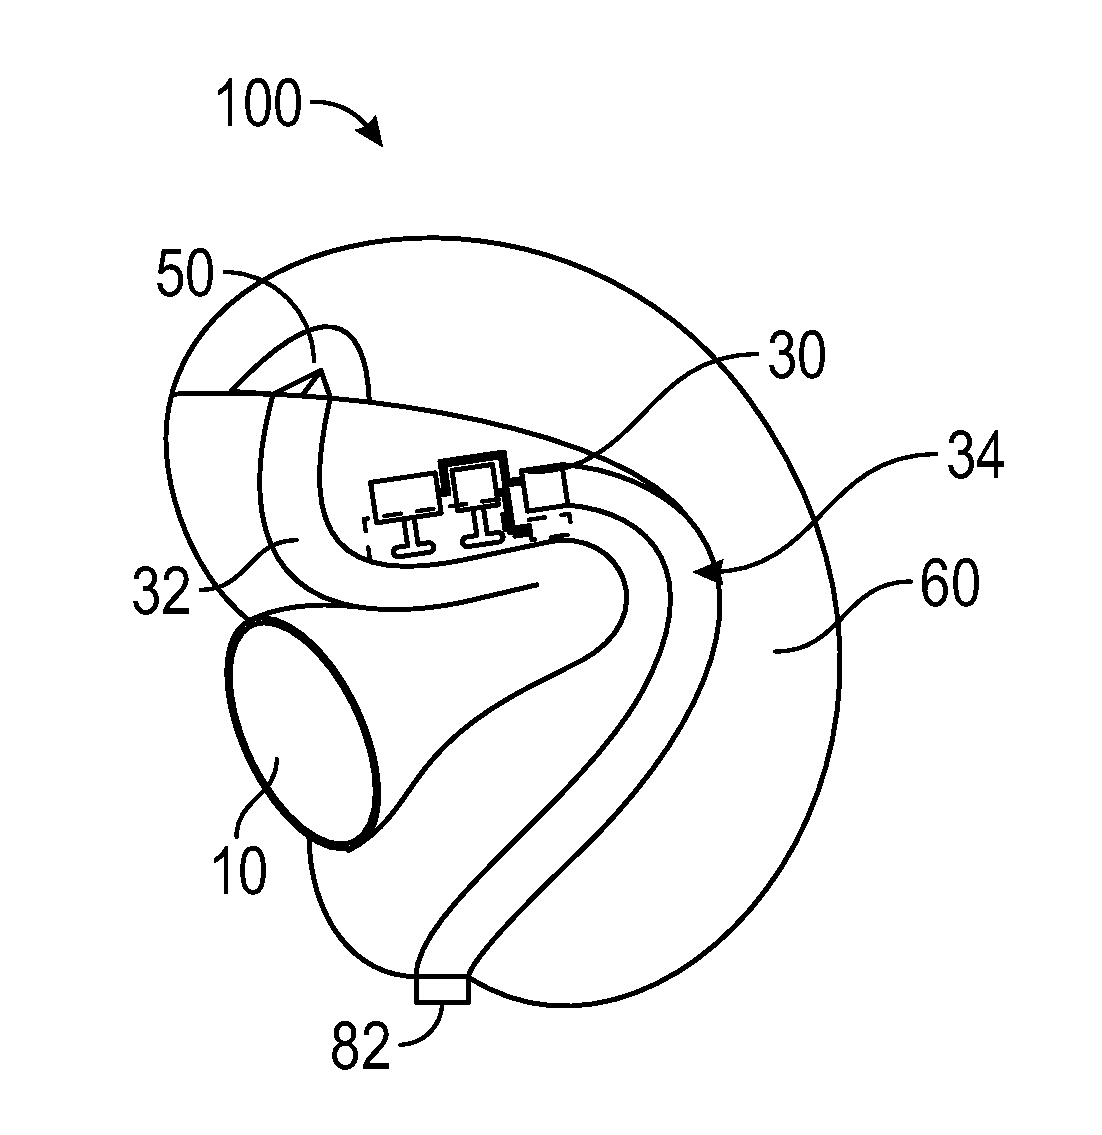 Breast pump system and methods